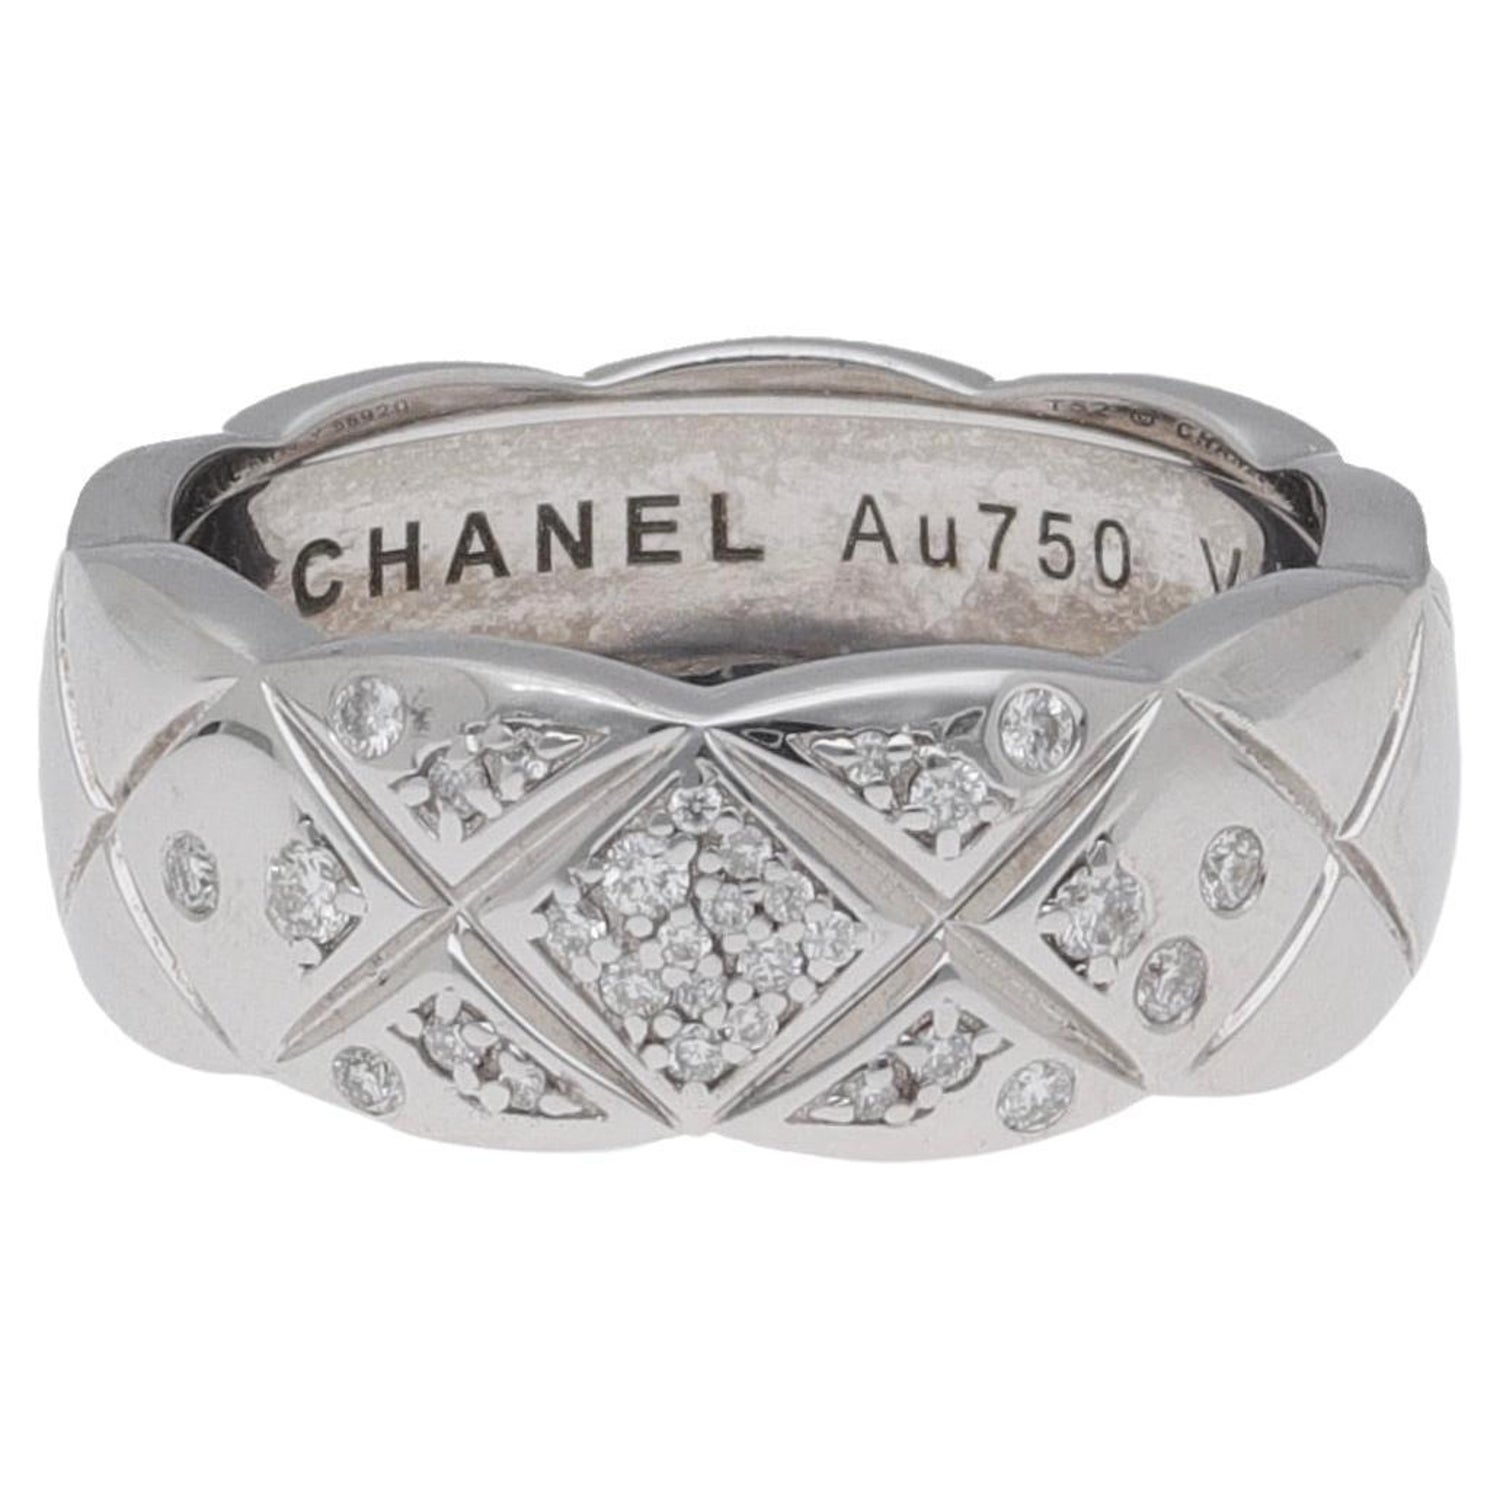 Coco Crush Ring - 4 For Sale on 1stDibs  chanel coco crush ring price,  coco crush ring as wedding band, coco crush rings